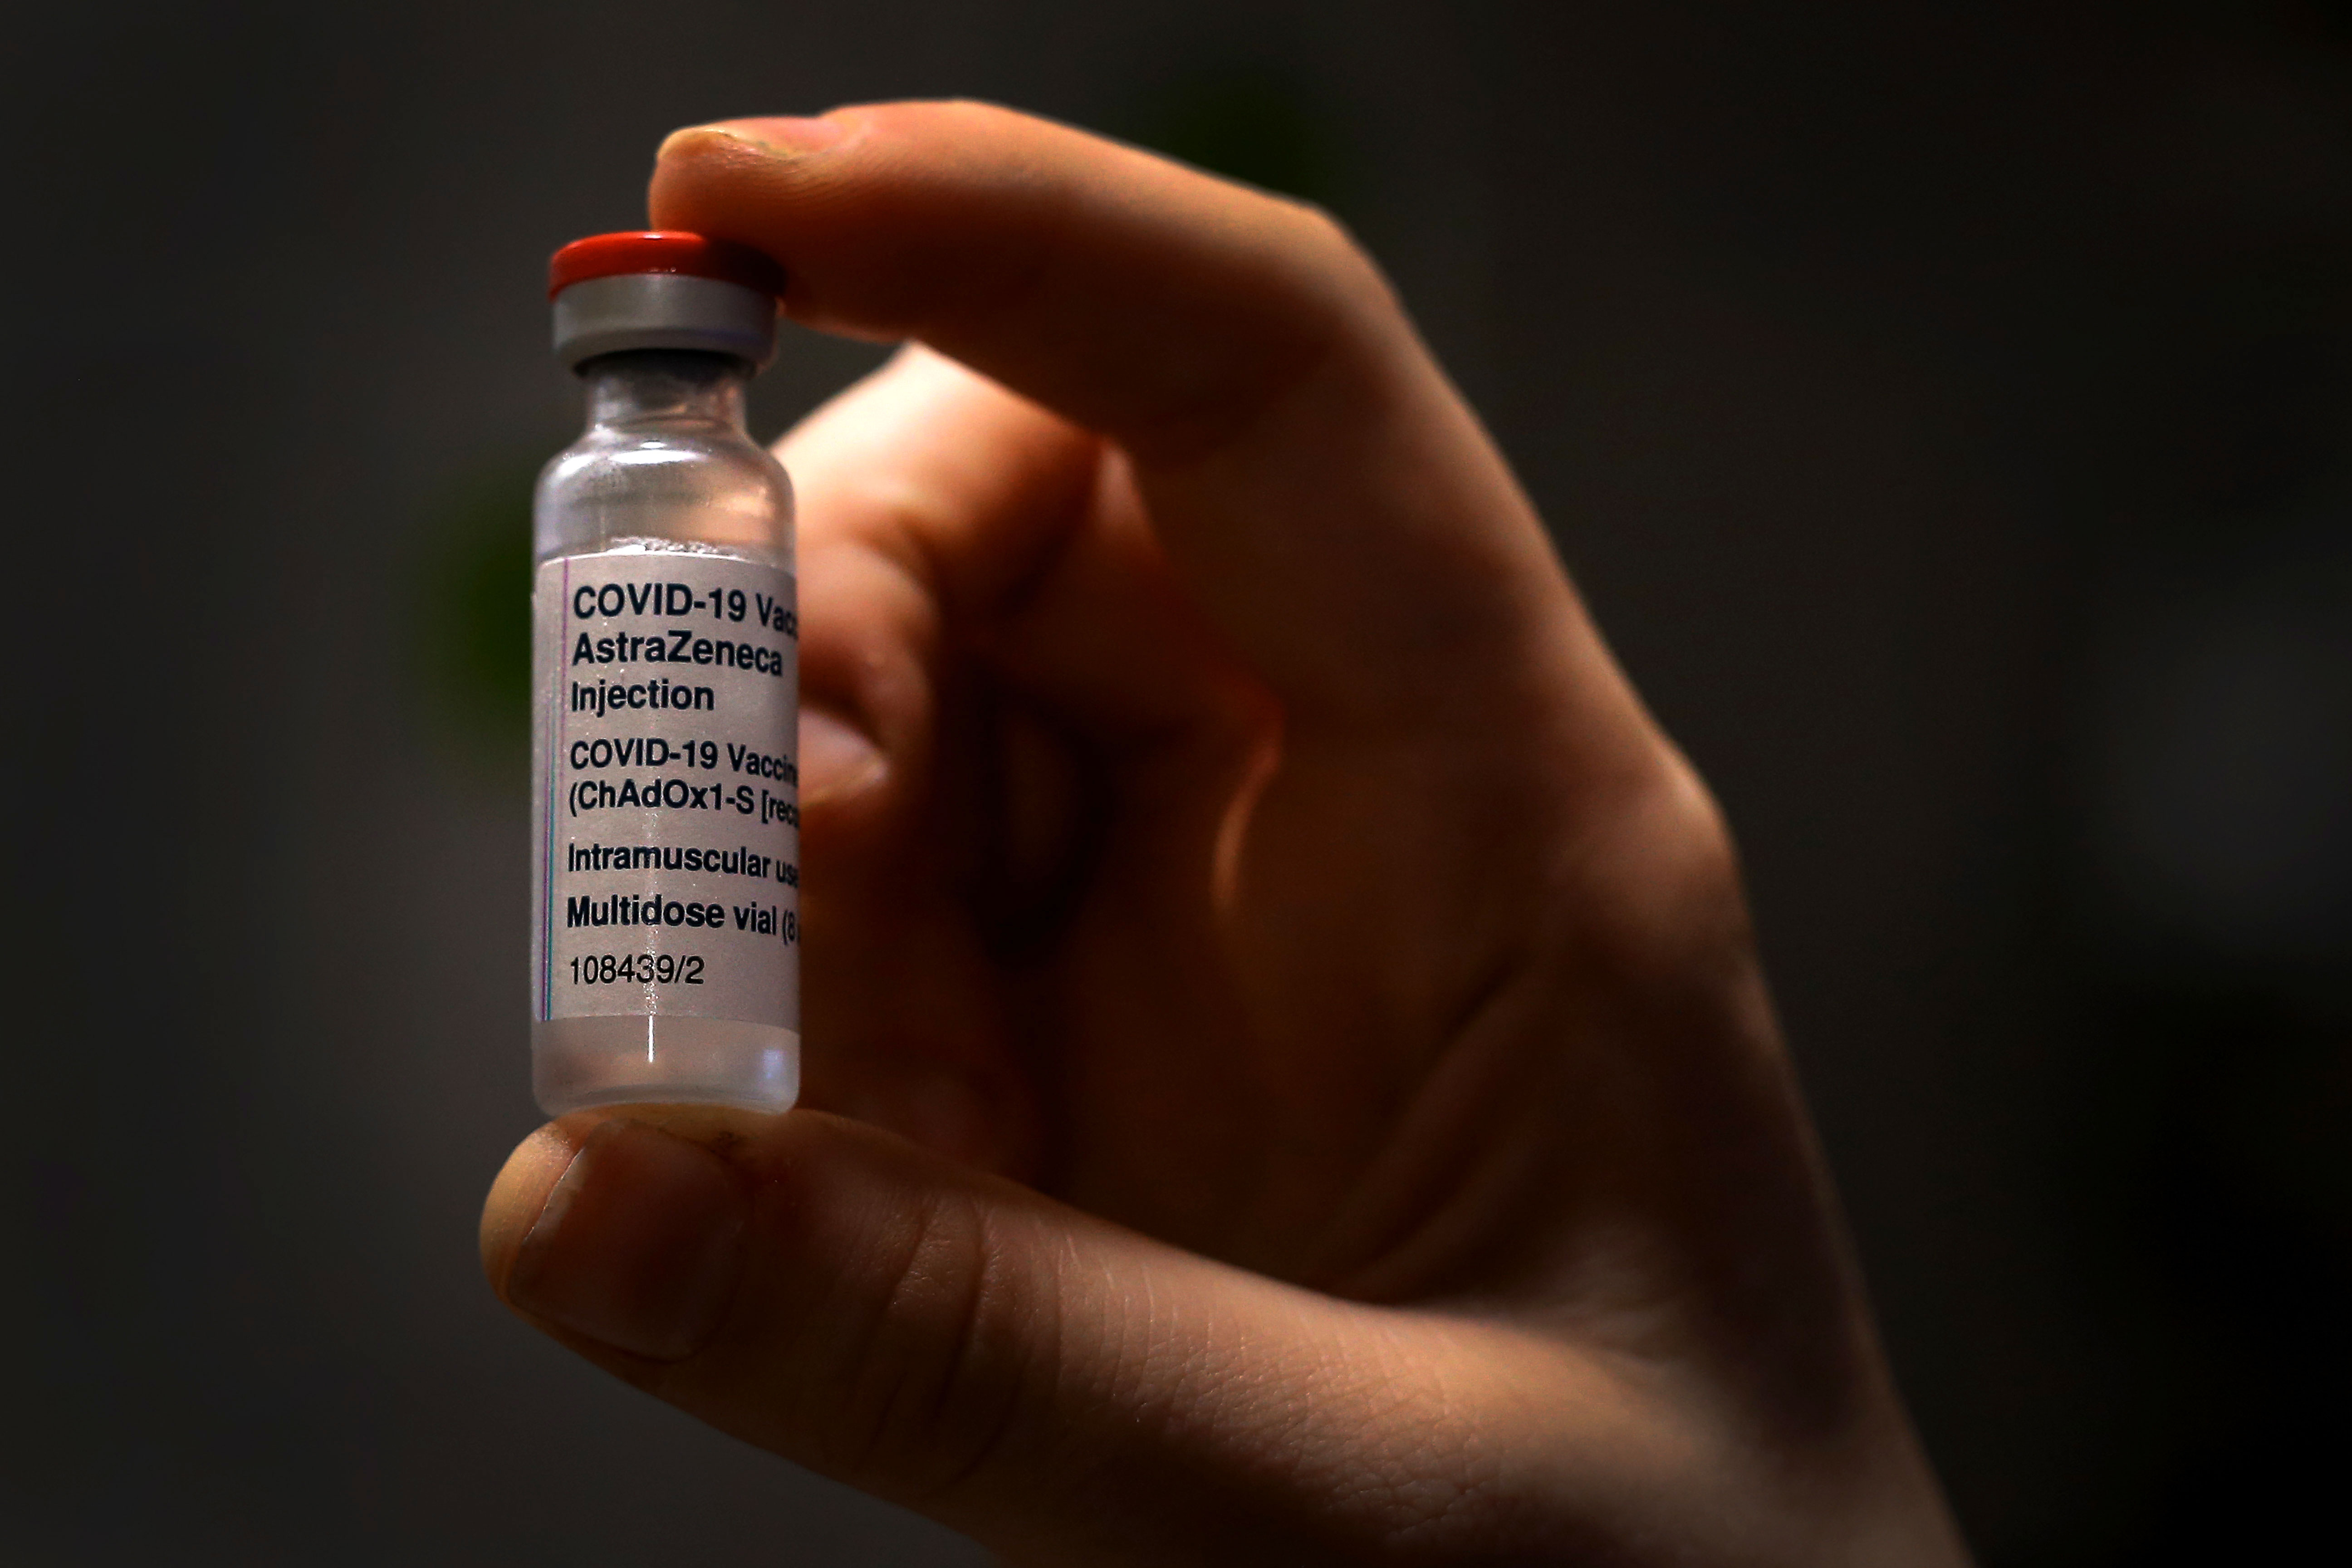 A nurse holds an AstraZeneca Covid-19 vaccine vial on March 23 in Sydney.